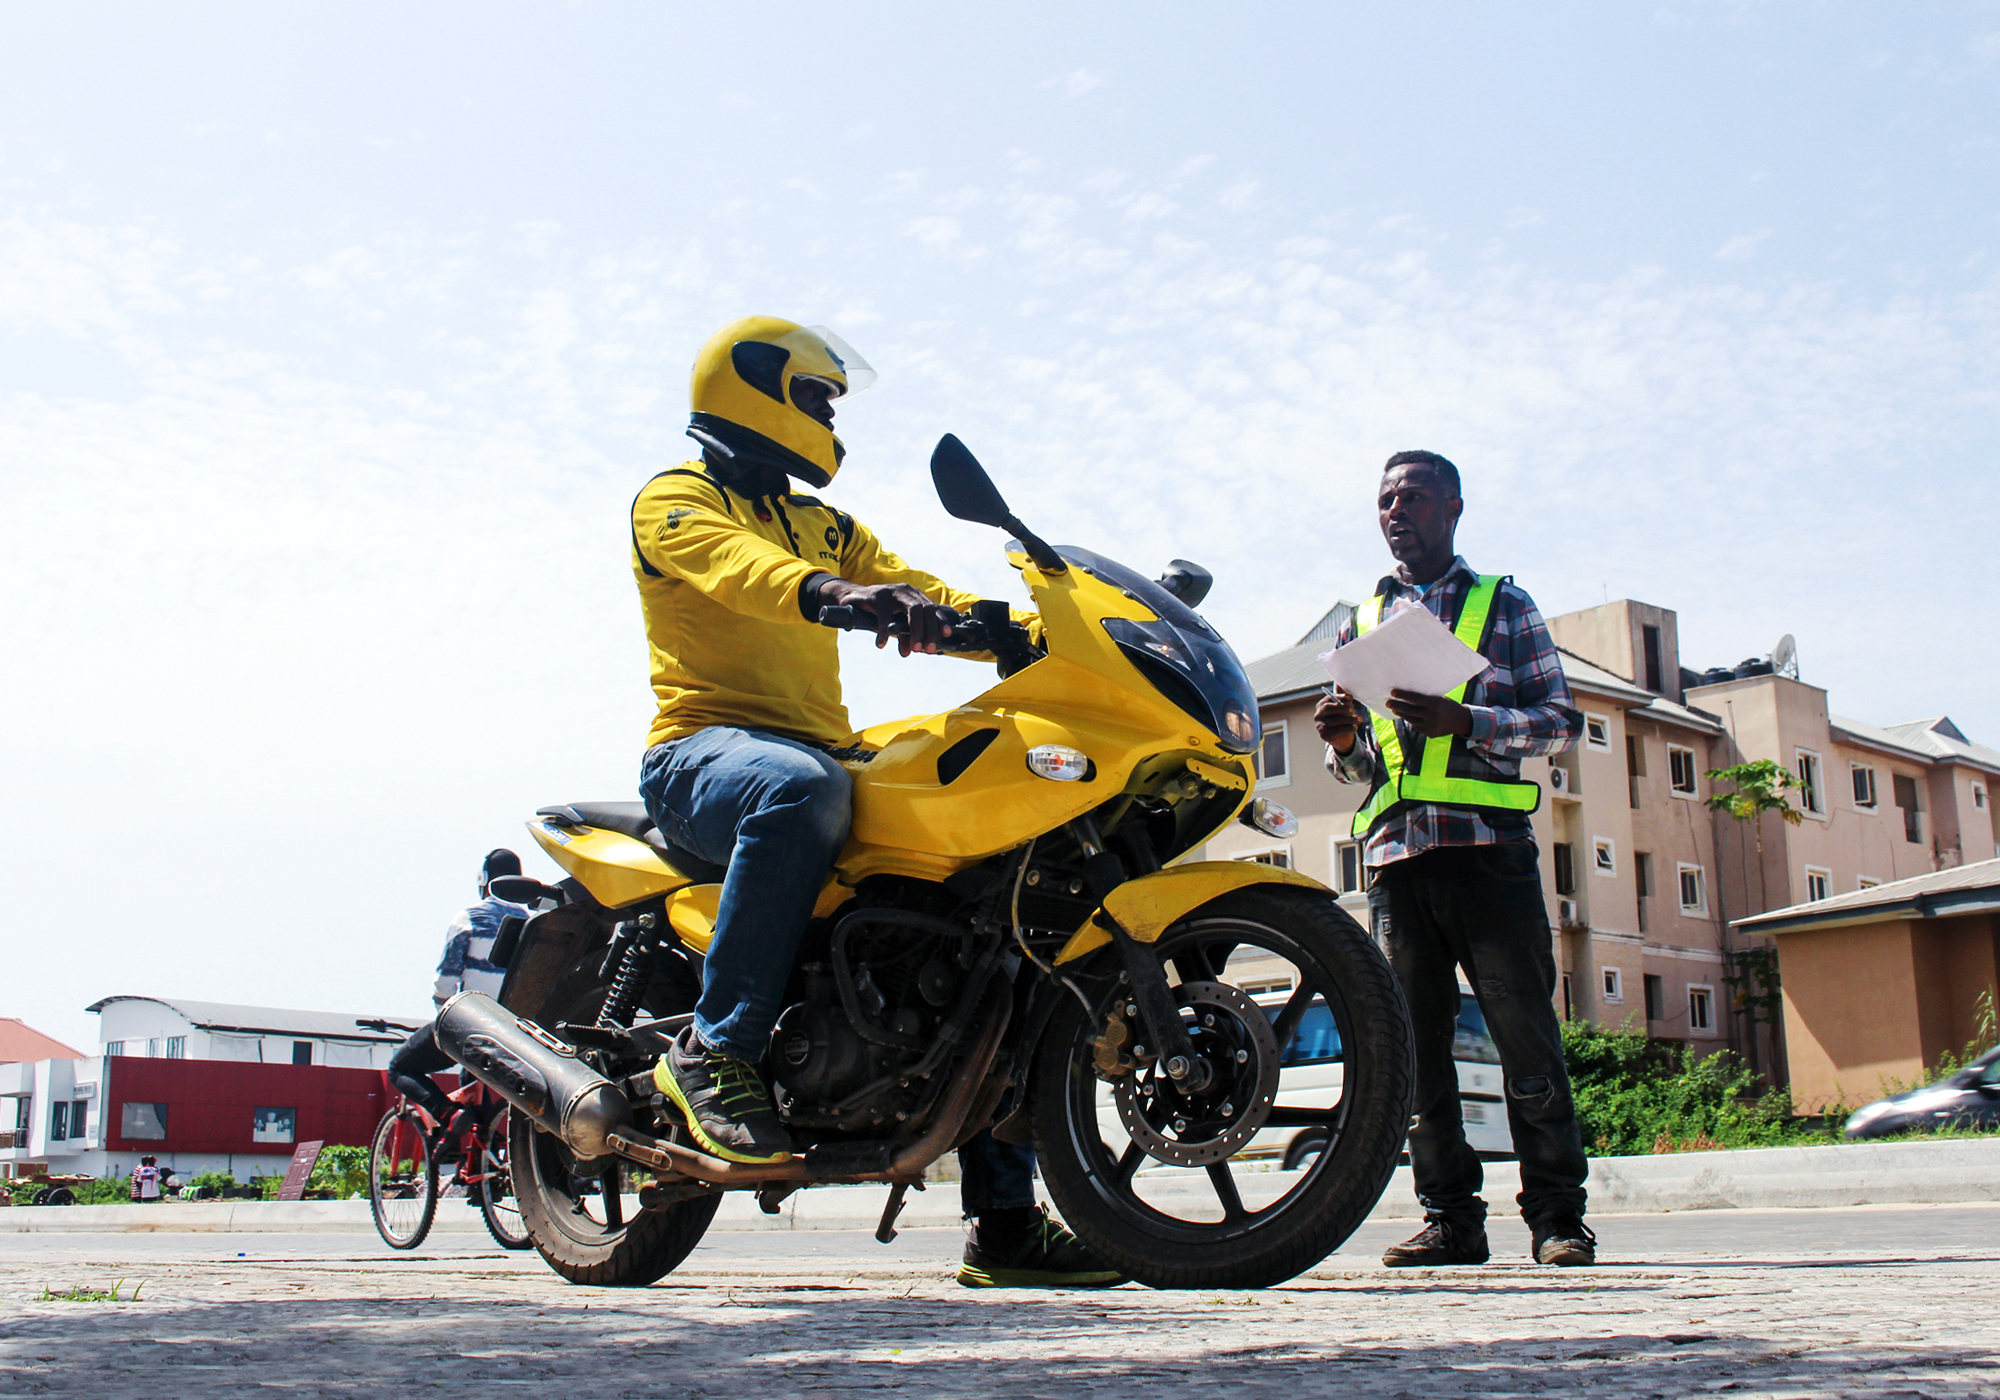 Person on yellow motorcycle talking to a man